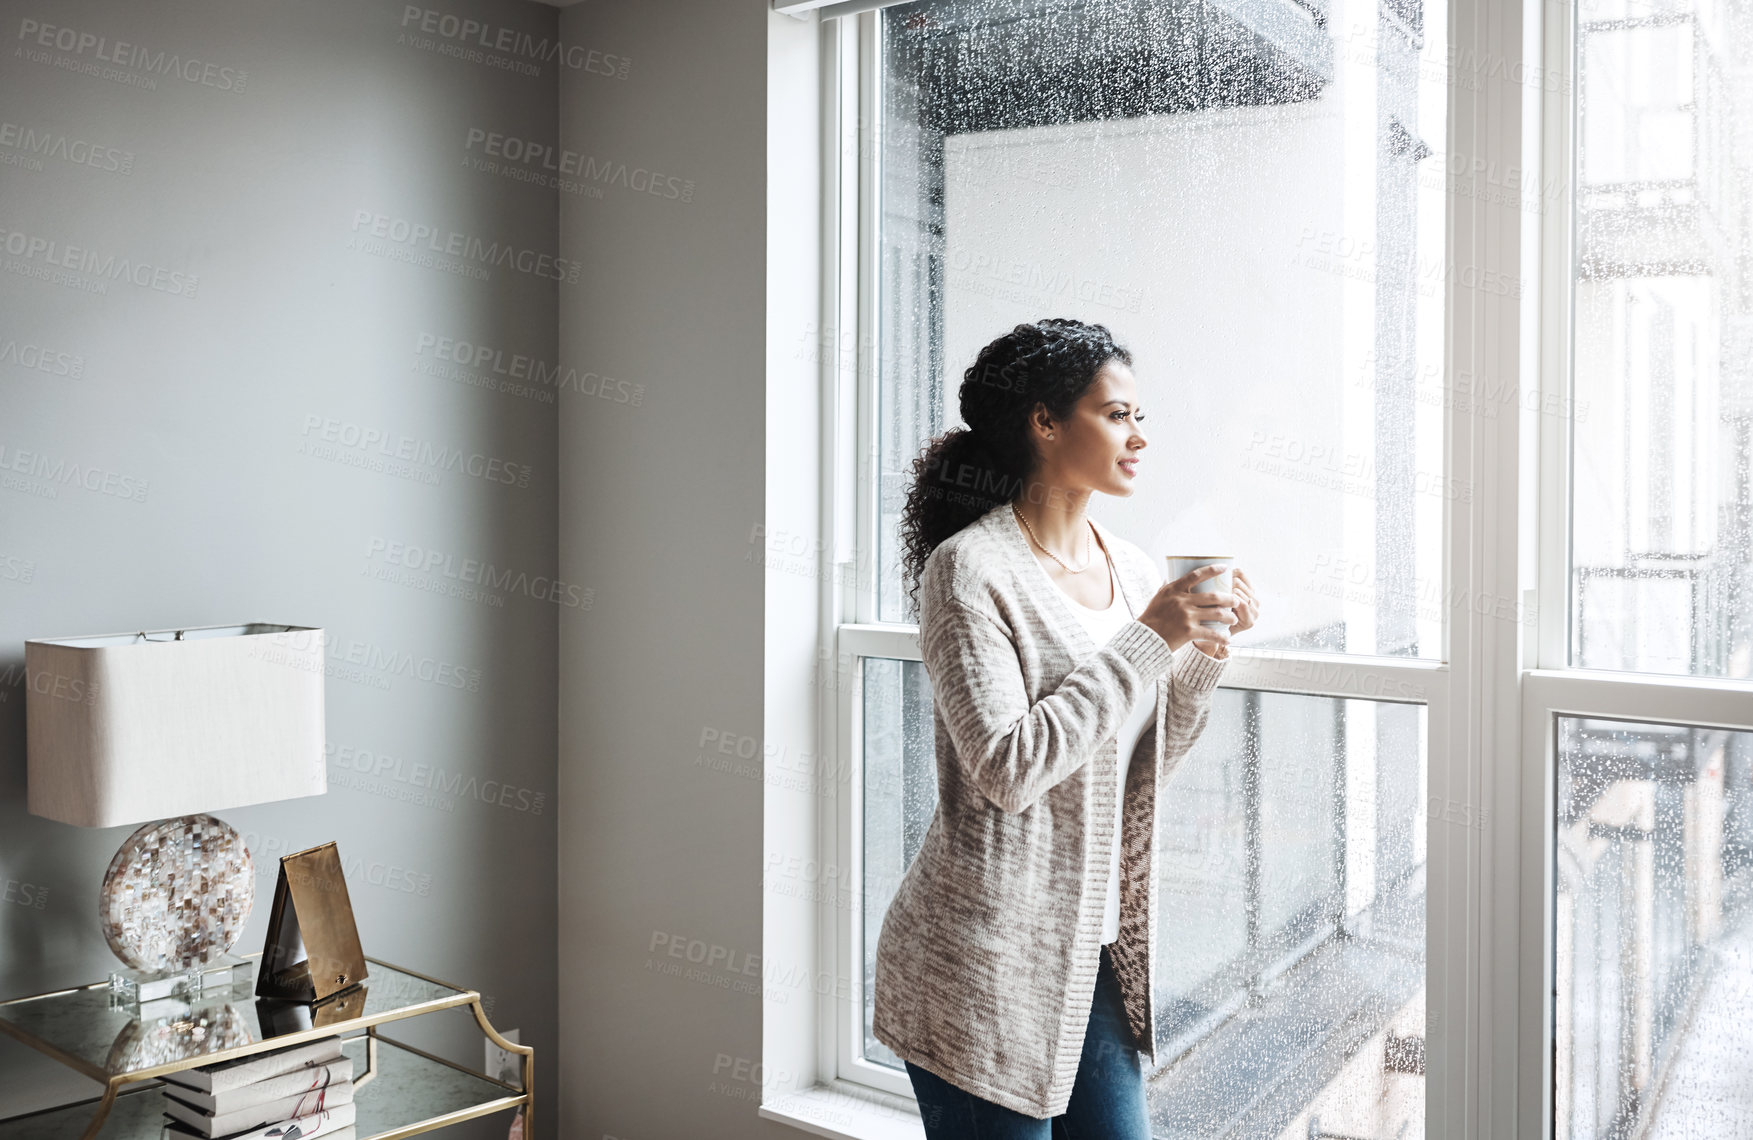 Buy stock photo Shot of a cheerful young woman drinking coffee while looking through a window inside at home during the day